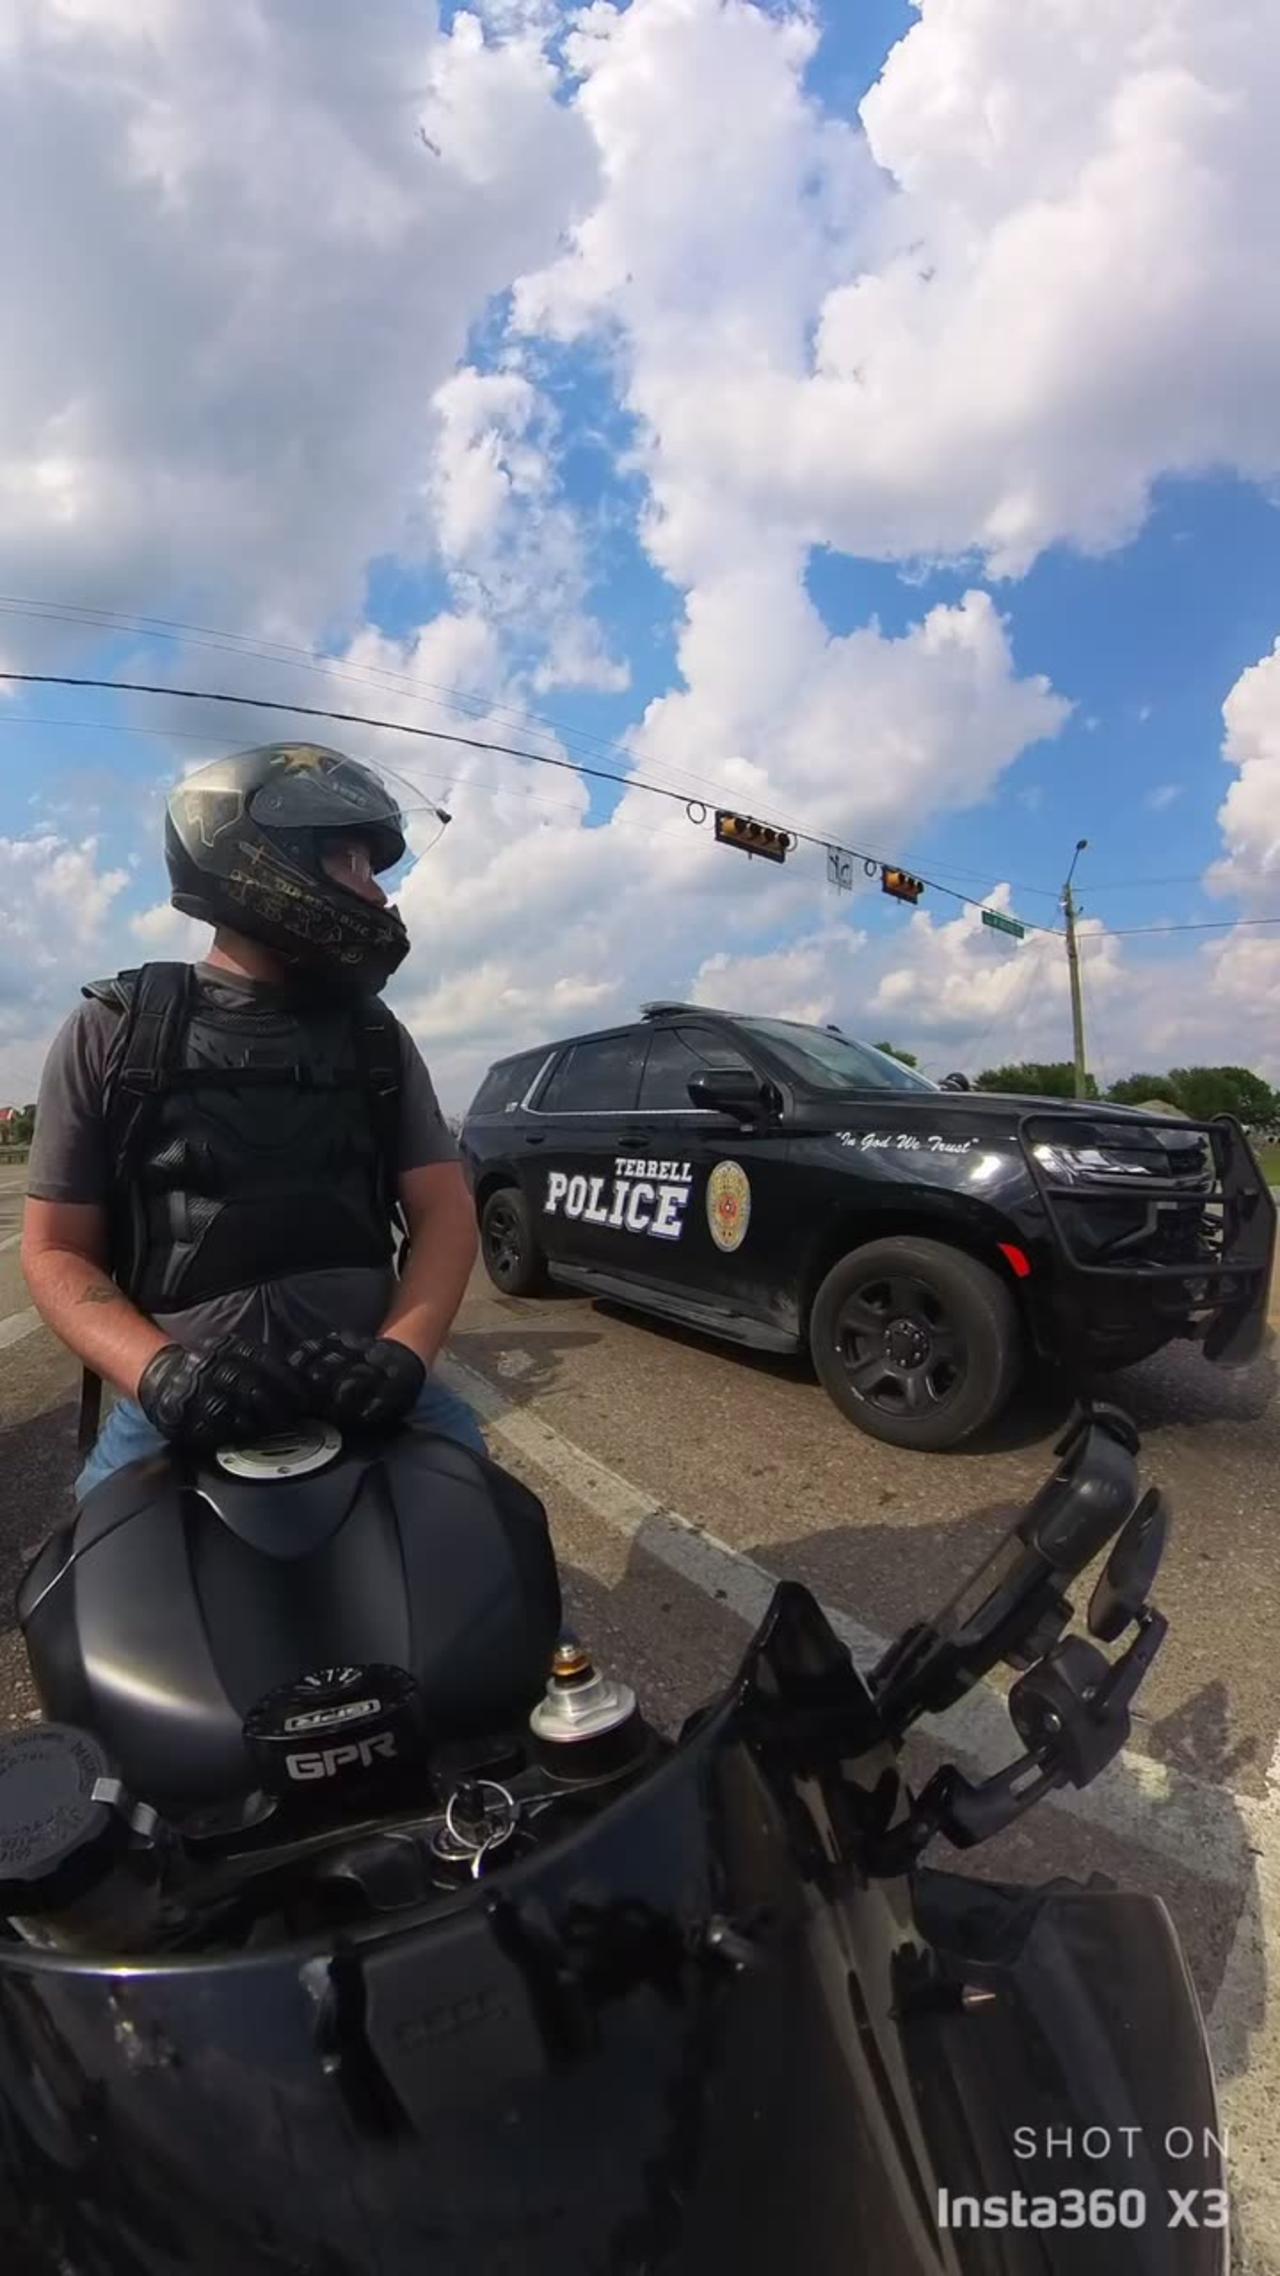 Cop Revs Engines With Motorcyclist